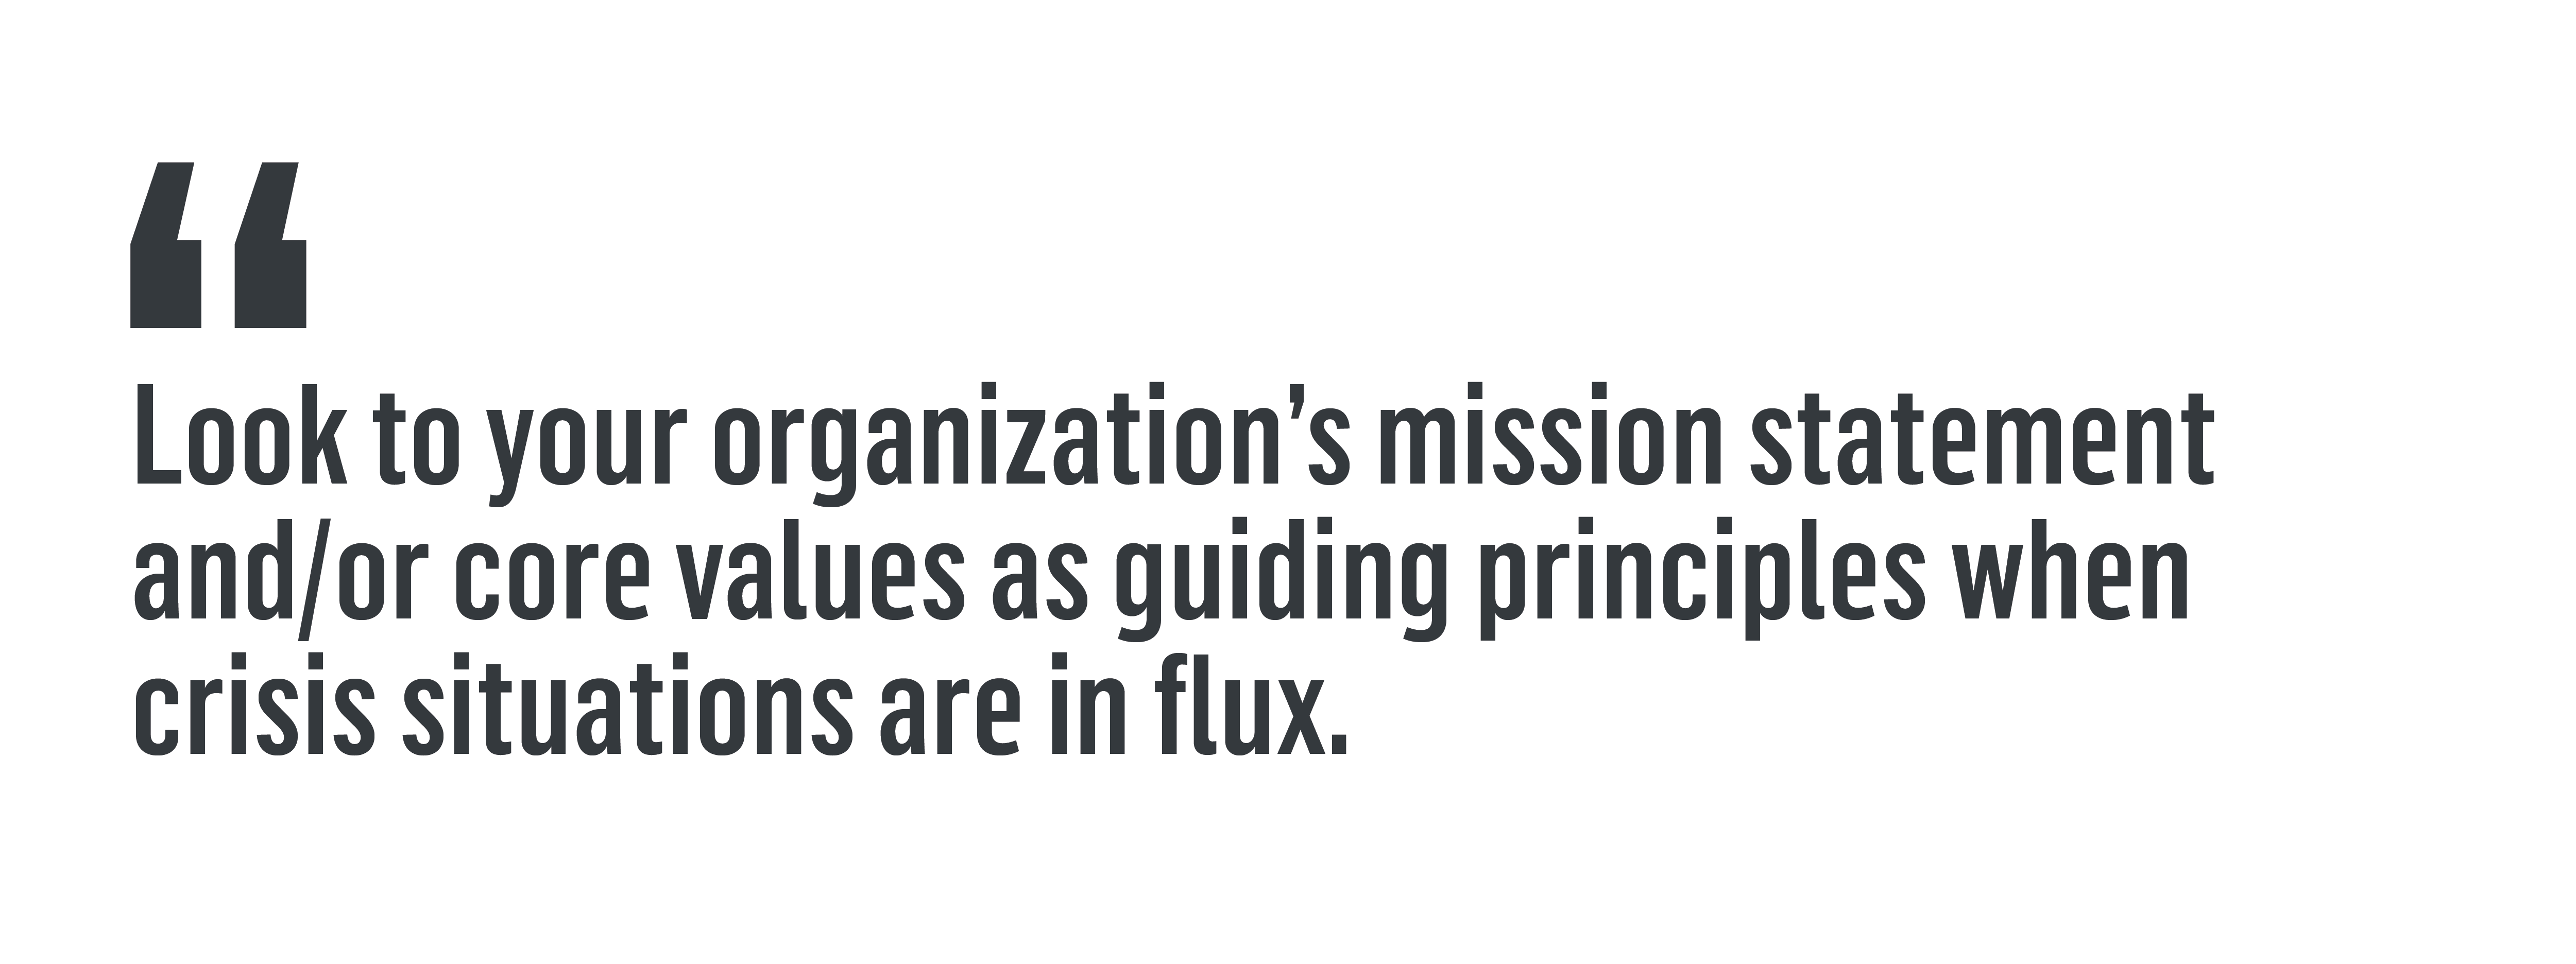 Look to your organization’s mission statement and/or core values as guiding principles when crisis situations are in flux.